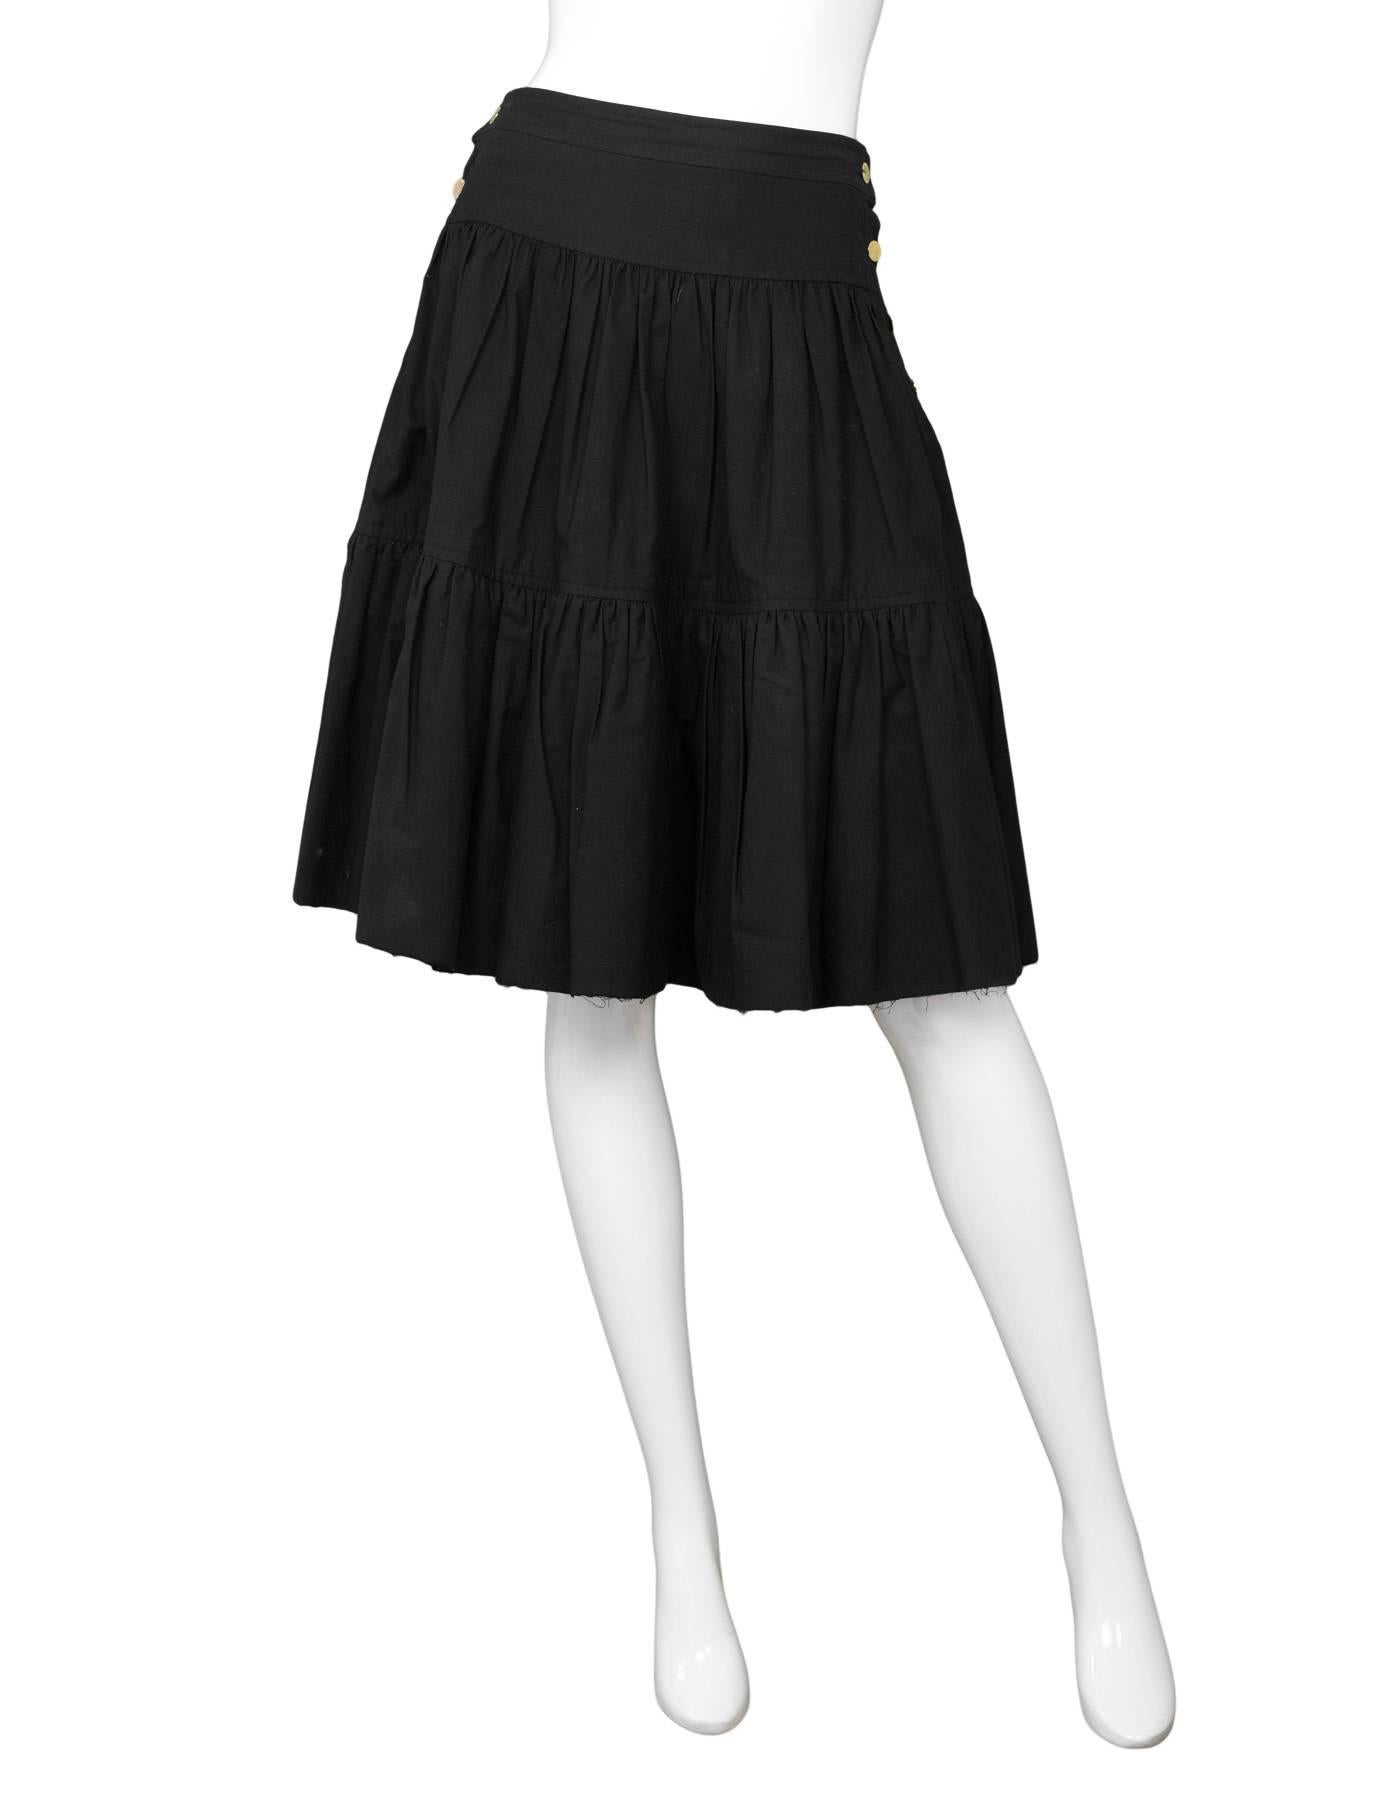 Chanel Black Cotton 2-Tier Skirt sz M In Excellent Condition In New York, NY